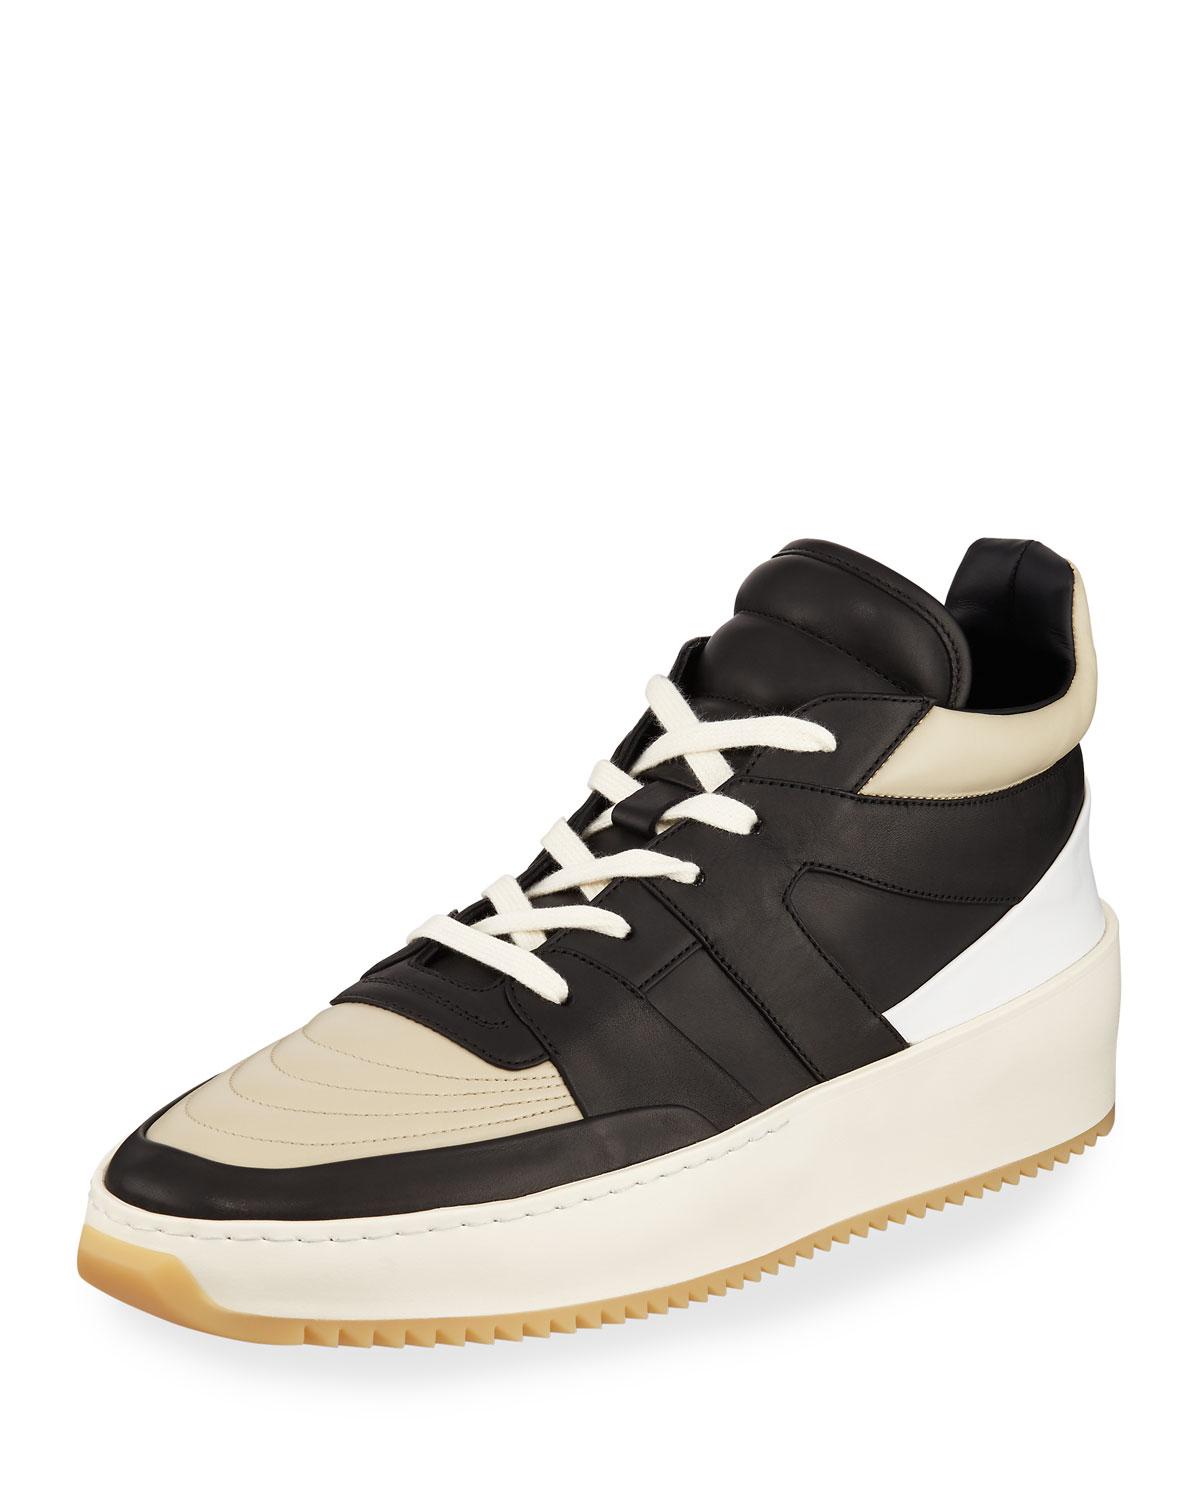 Fear Of God Men's Two-tone Leather Mid-top Basketball Sneakers in Gray ...